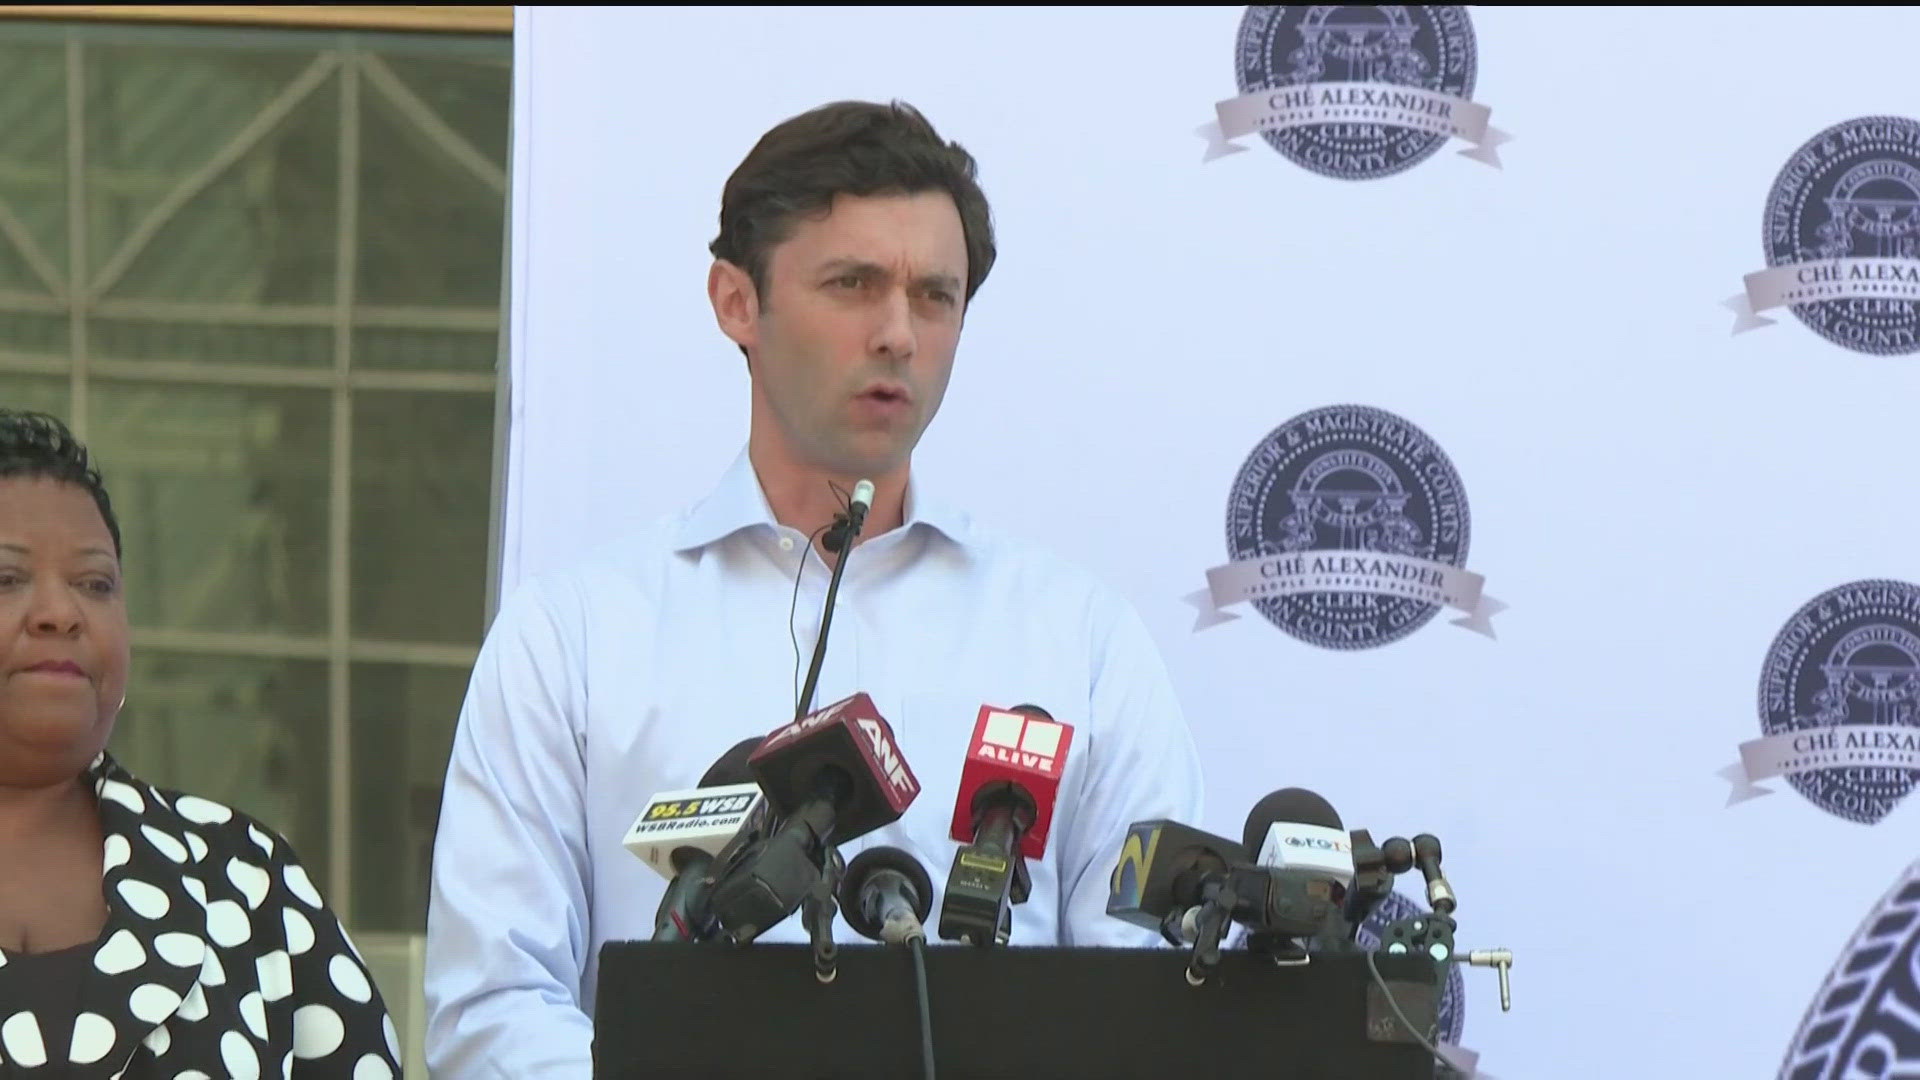 As USPS mail delays continue, Senator Ossoff called the issue dire, especially for Fulton County residents. Official mail continues to be delayed by weeks or more.